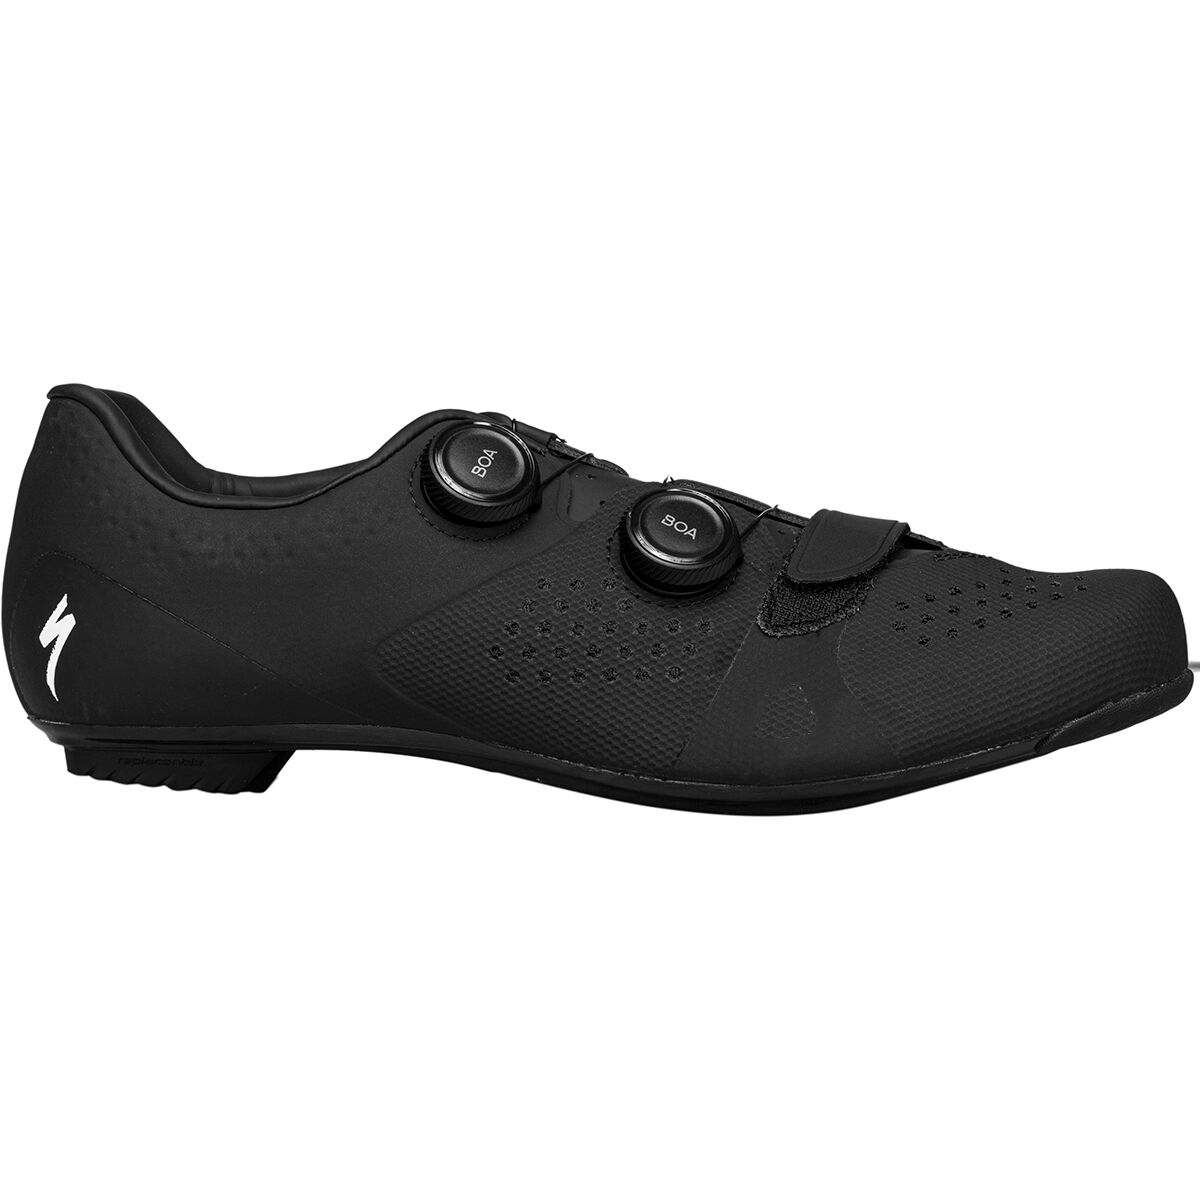 Specialized Torch 3.0 Cycling Shoe